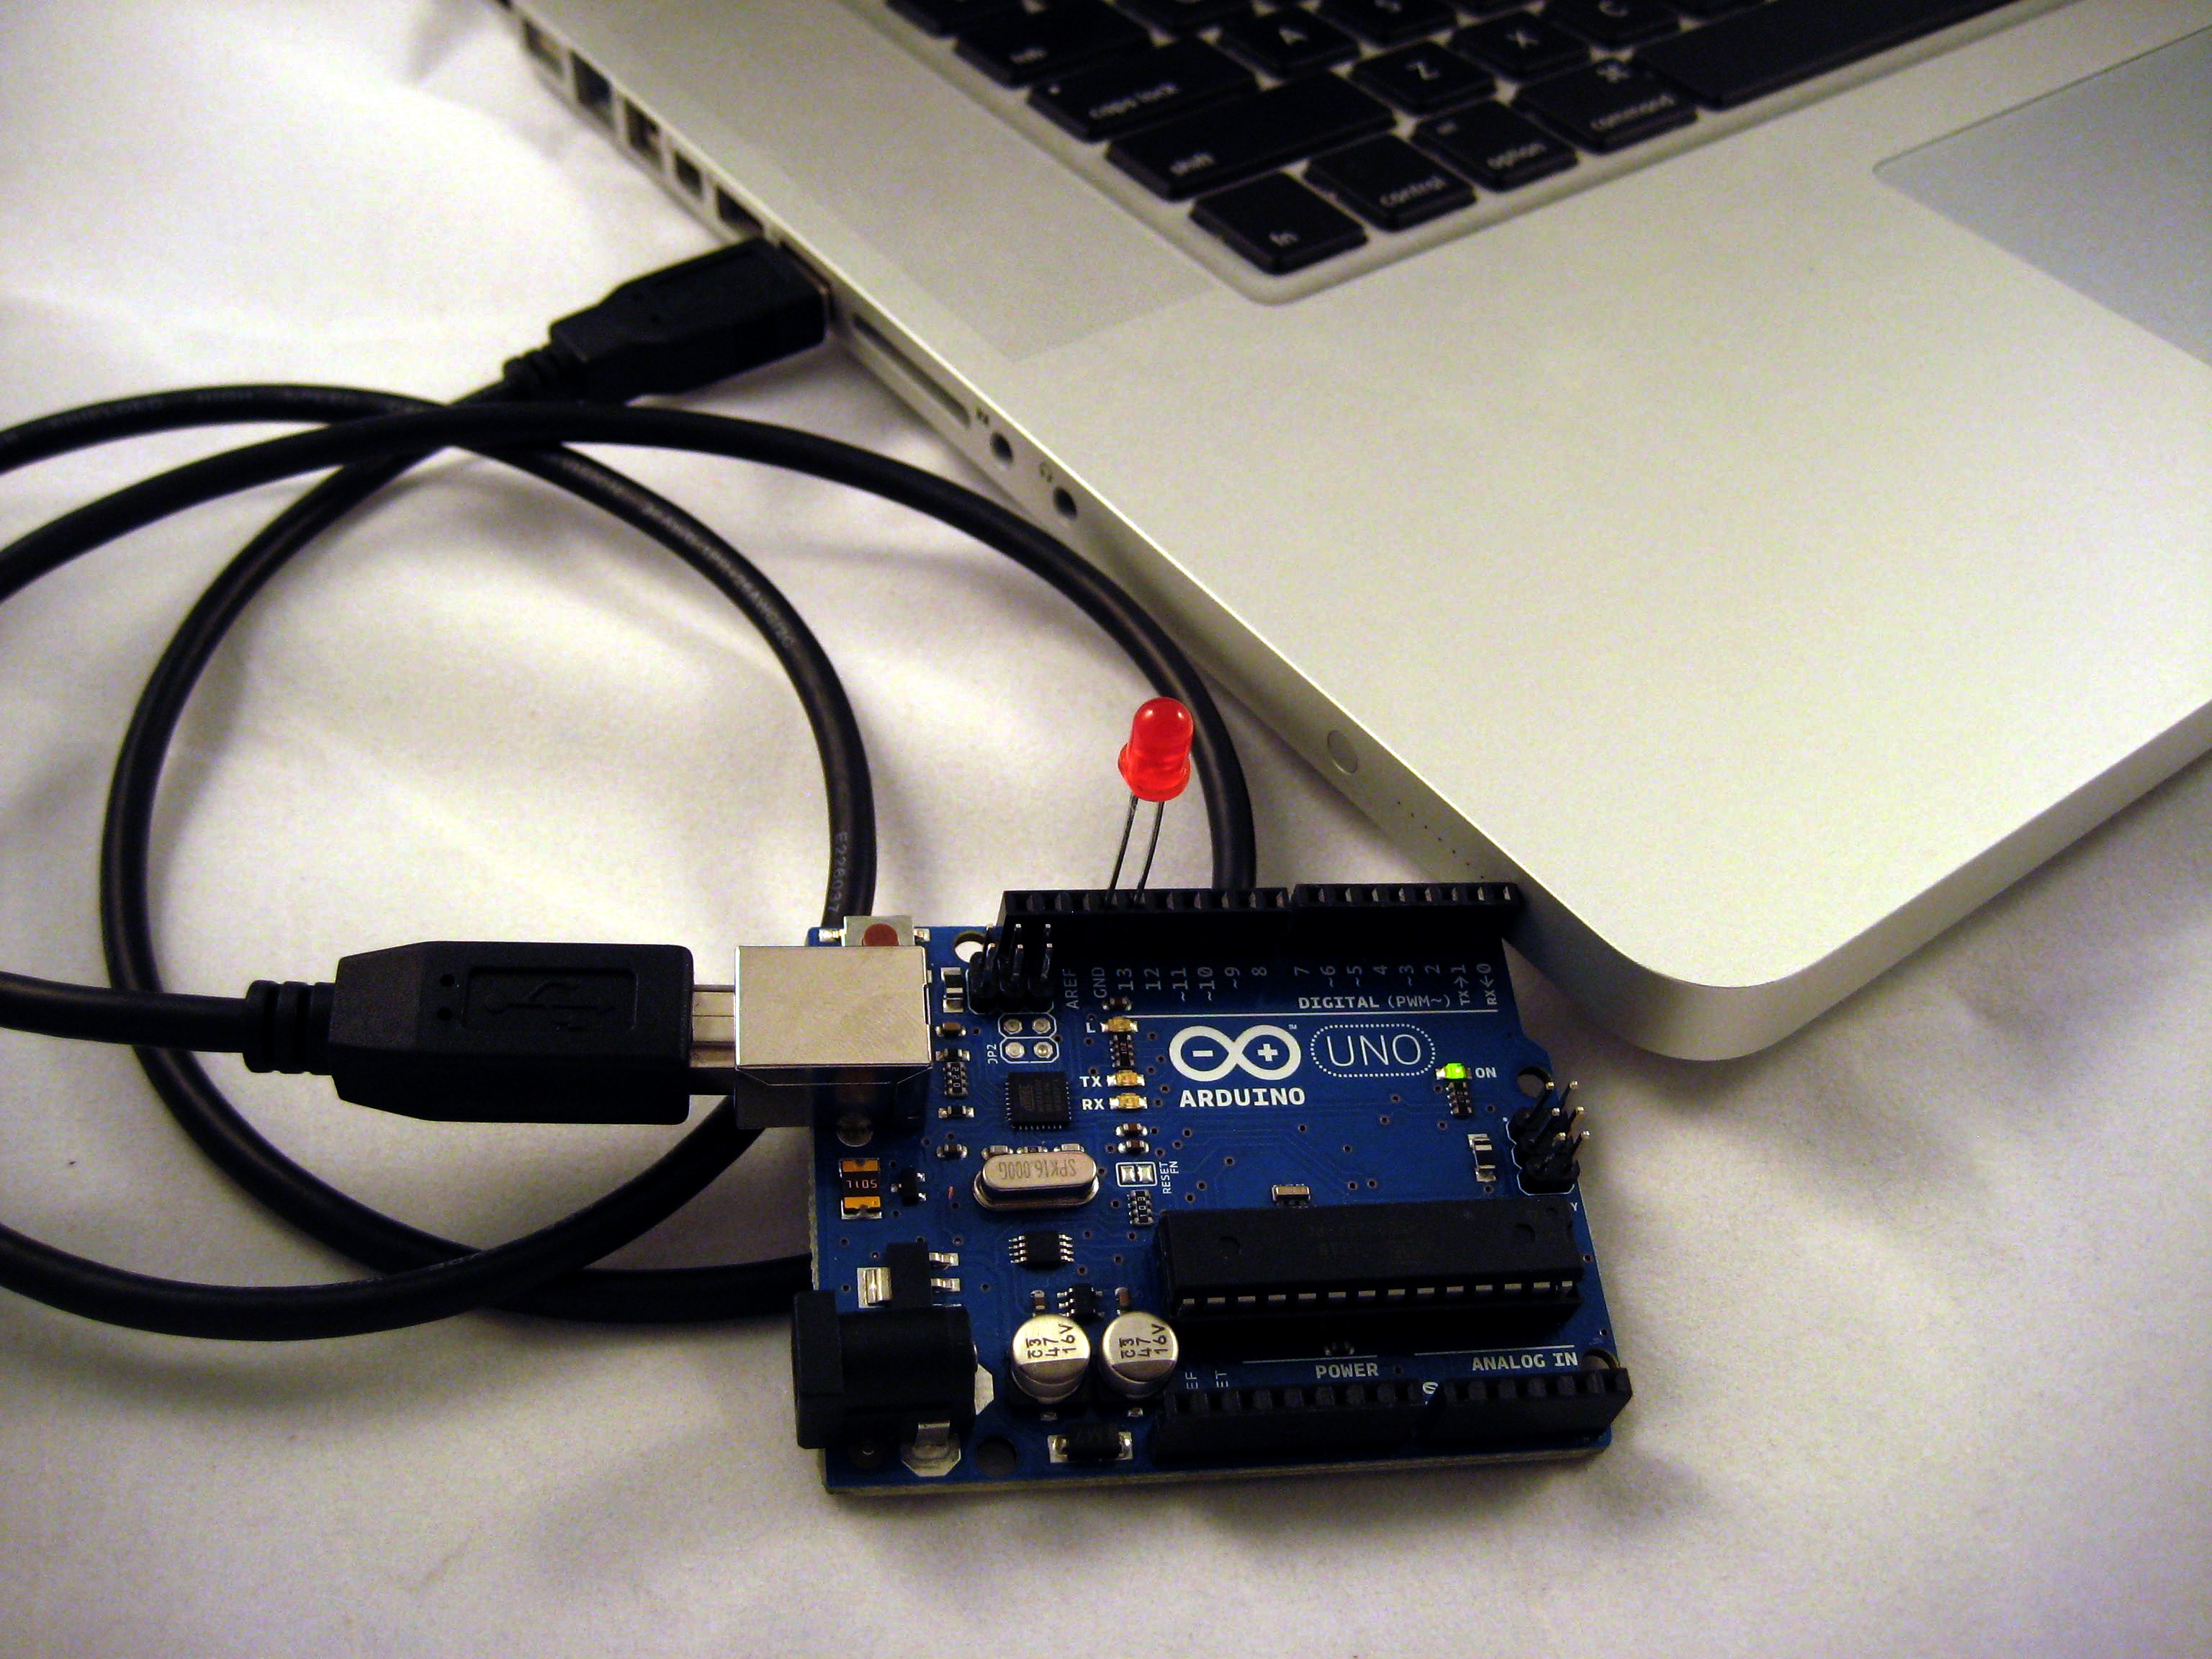 Figure 4: Connect the Arduino via USB to upload your sketch and power the board.